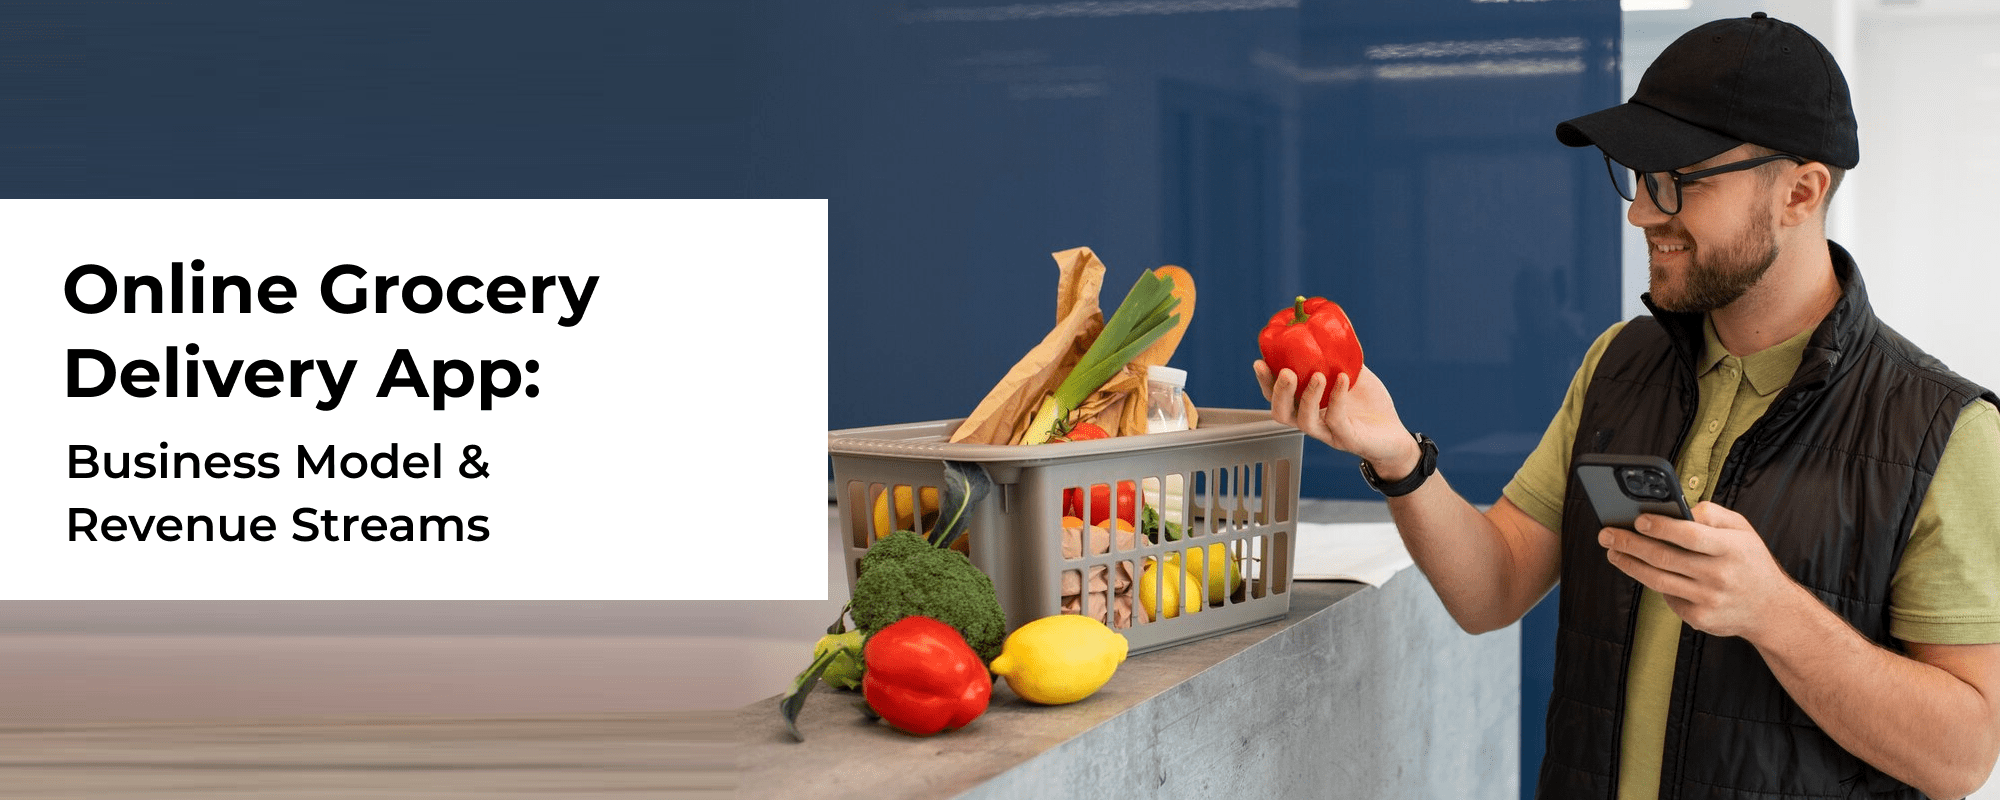 All you Need to Know About Launching an Online Grocery Delivery App